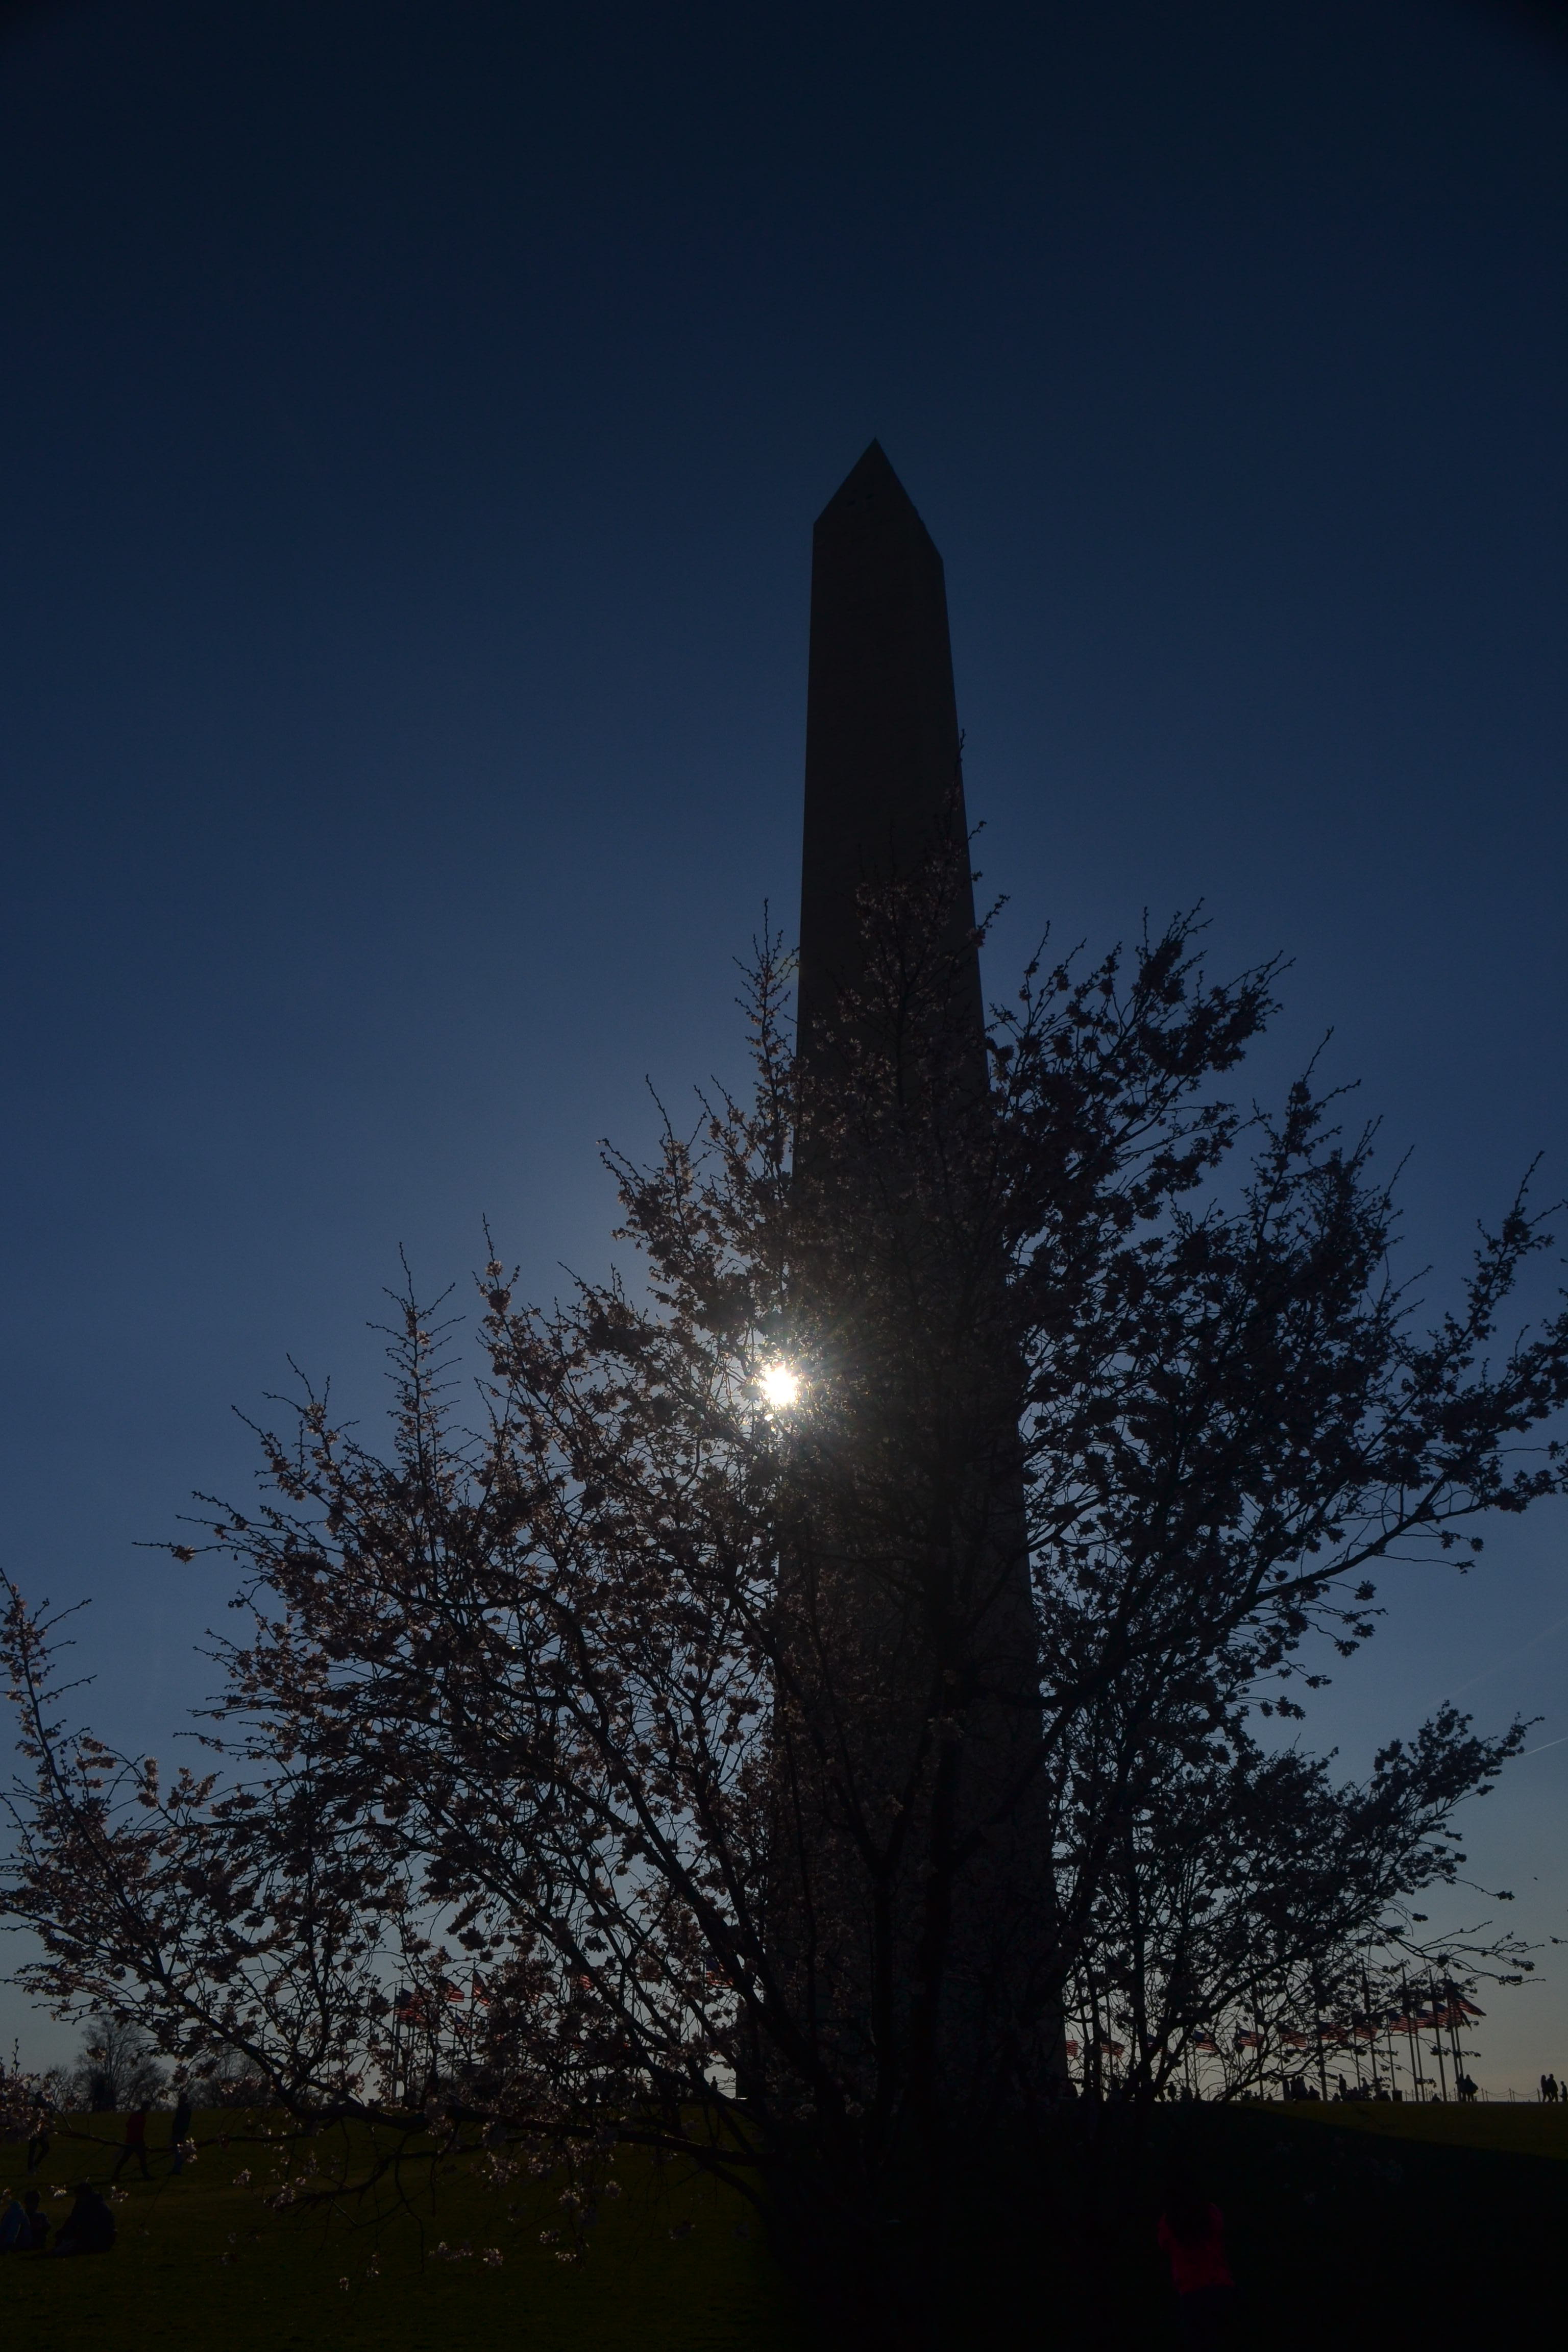 A silhouette of a blooming cherry tree before the silhouette of a large obelisk.